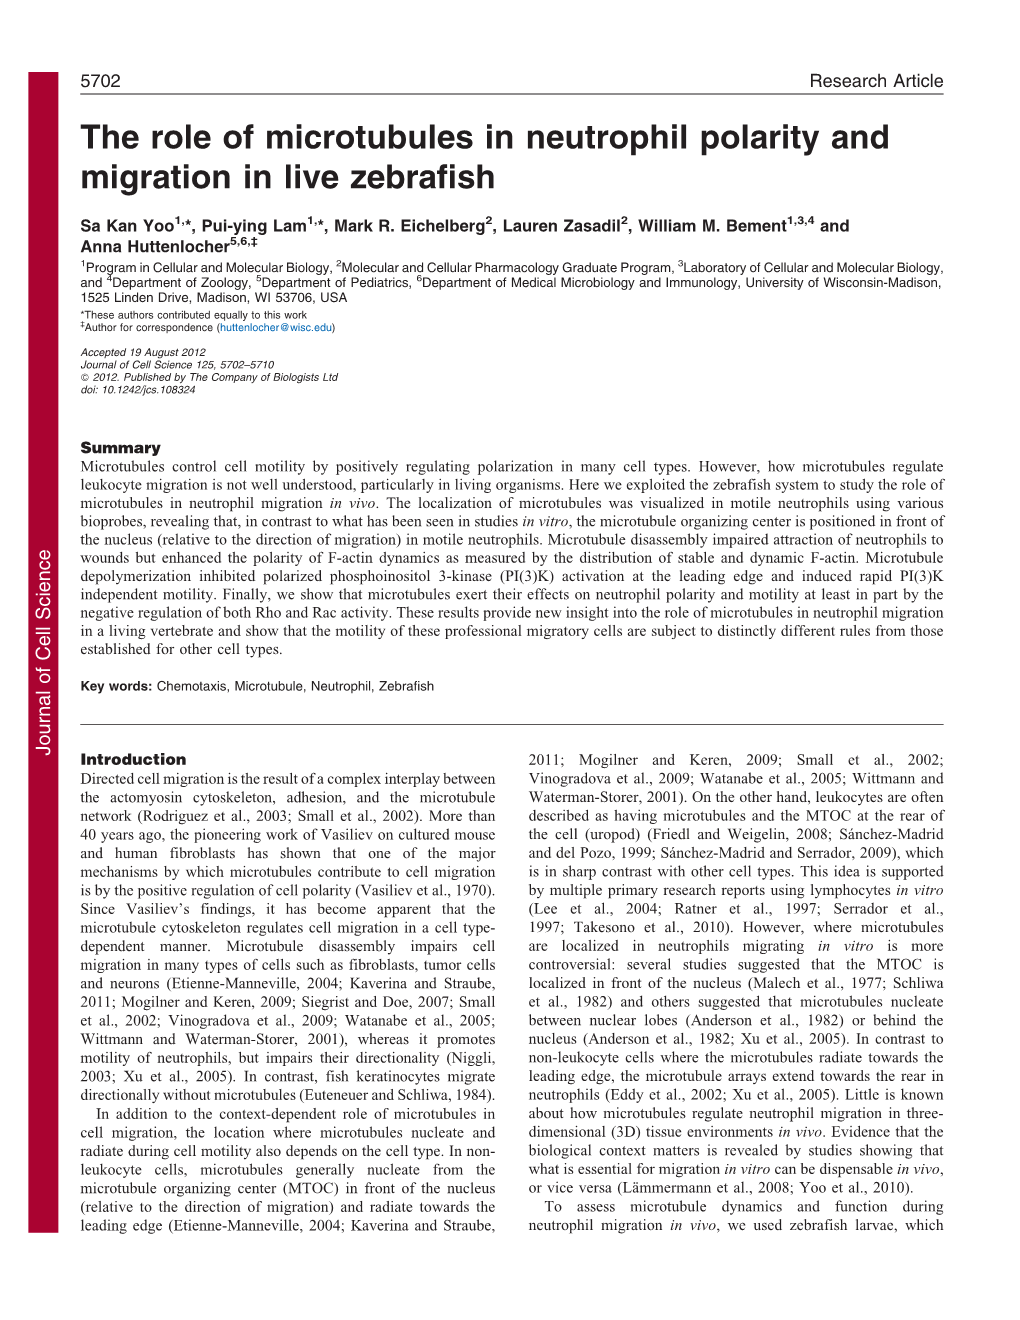 The Role of Microtubules in Neutrophil Polarity and Migration in Live Zebrafish